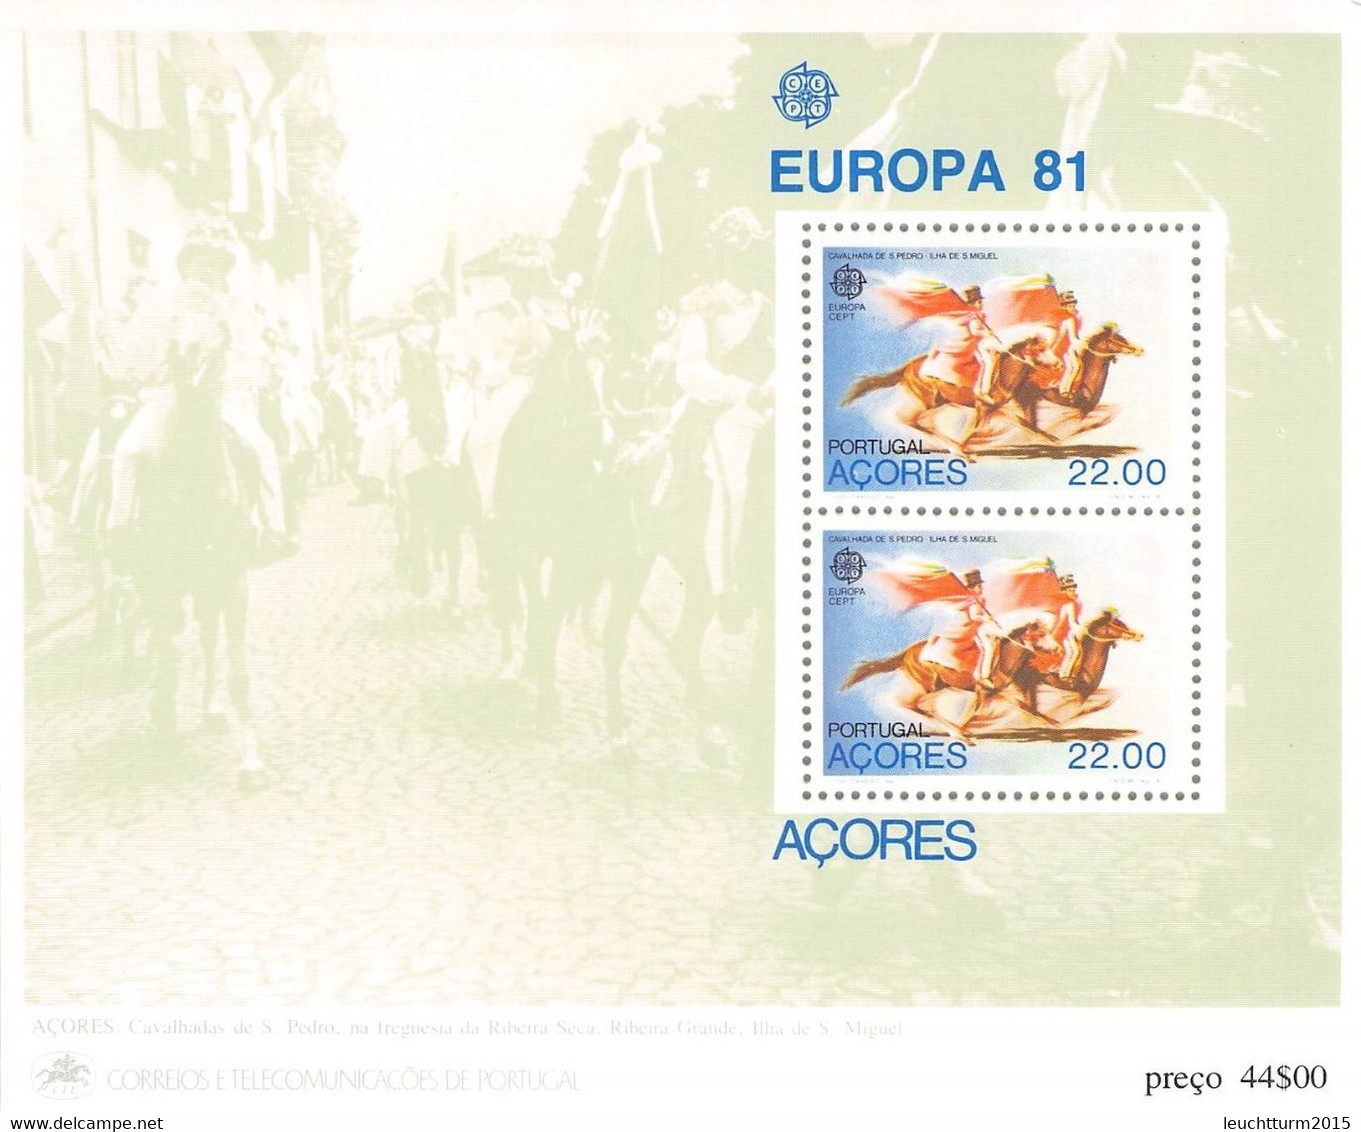 EUROPA - SMALL COLLECTION STAMPS, MINISHEETS MNH /QF130